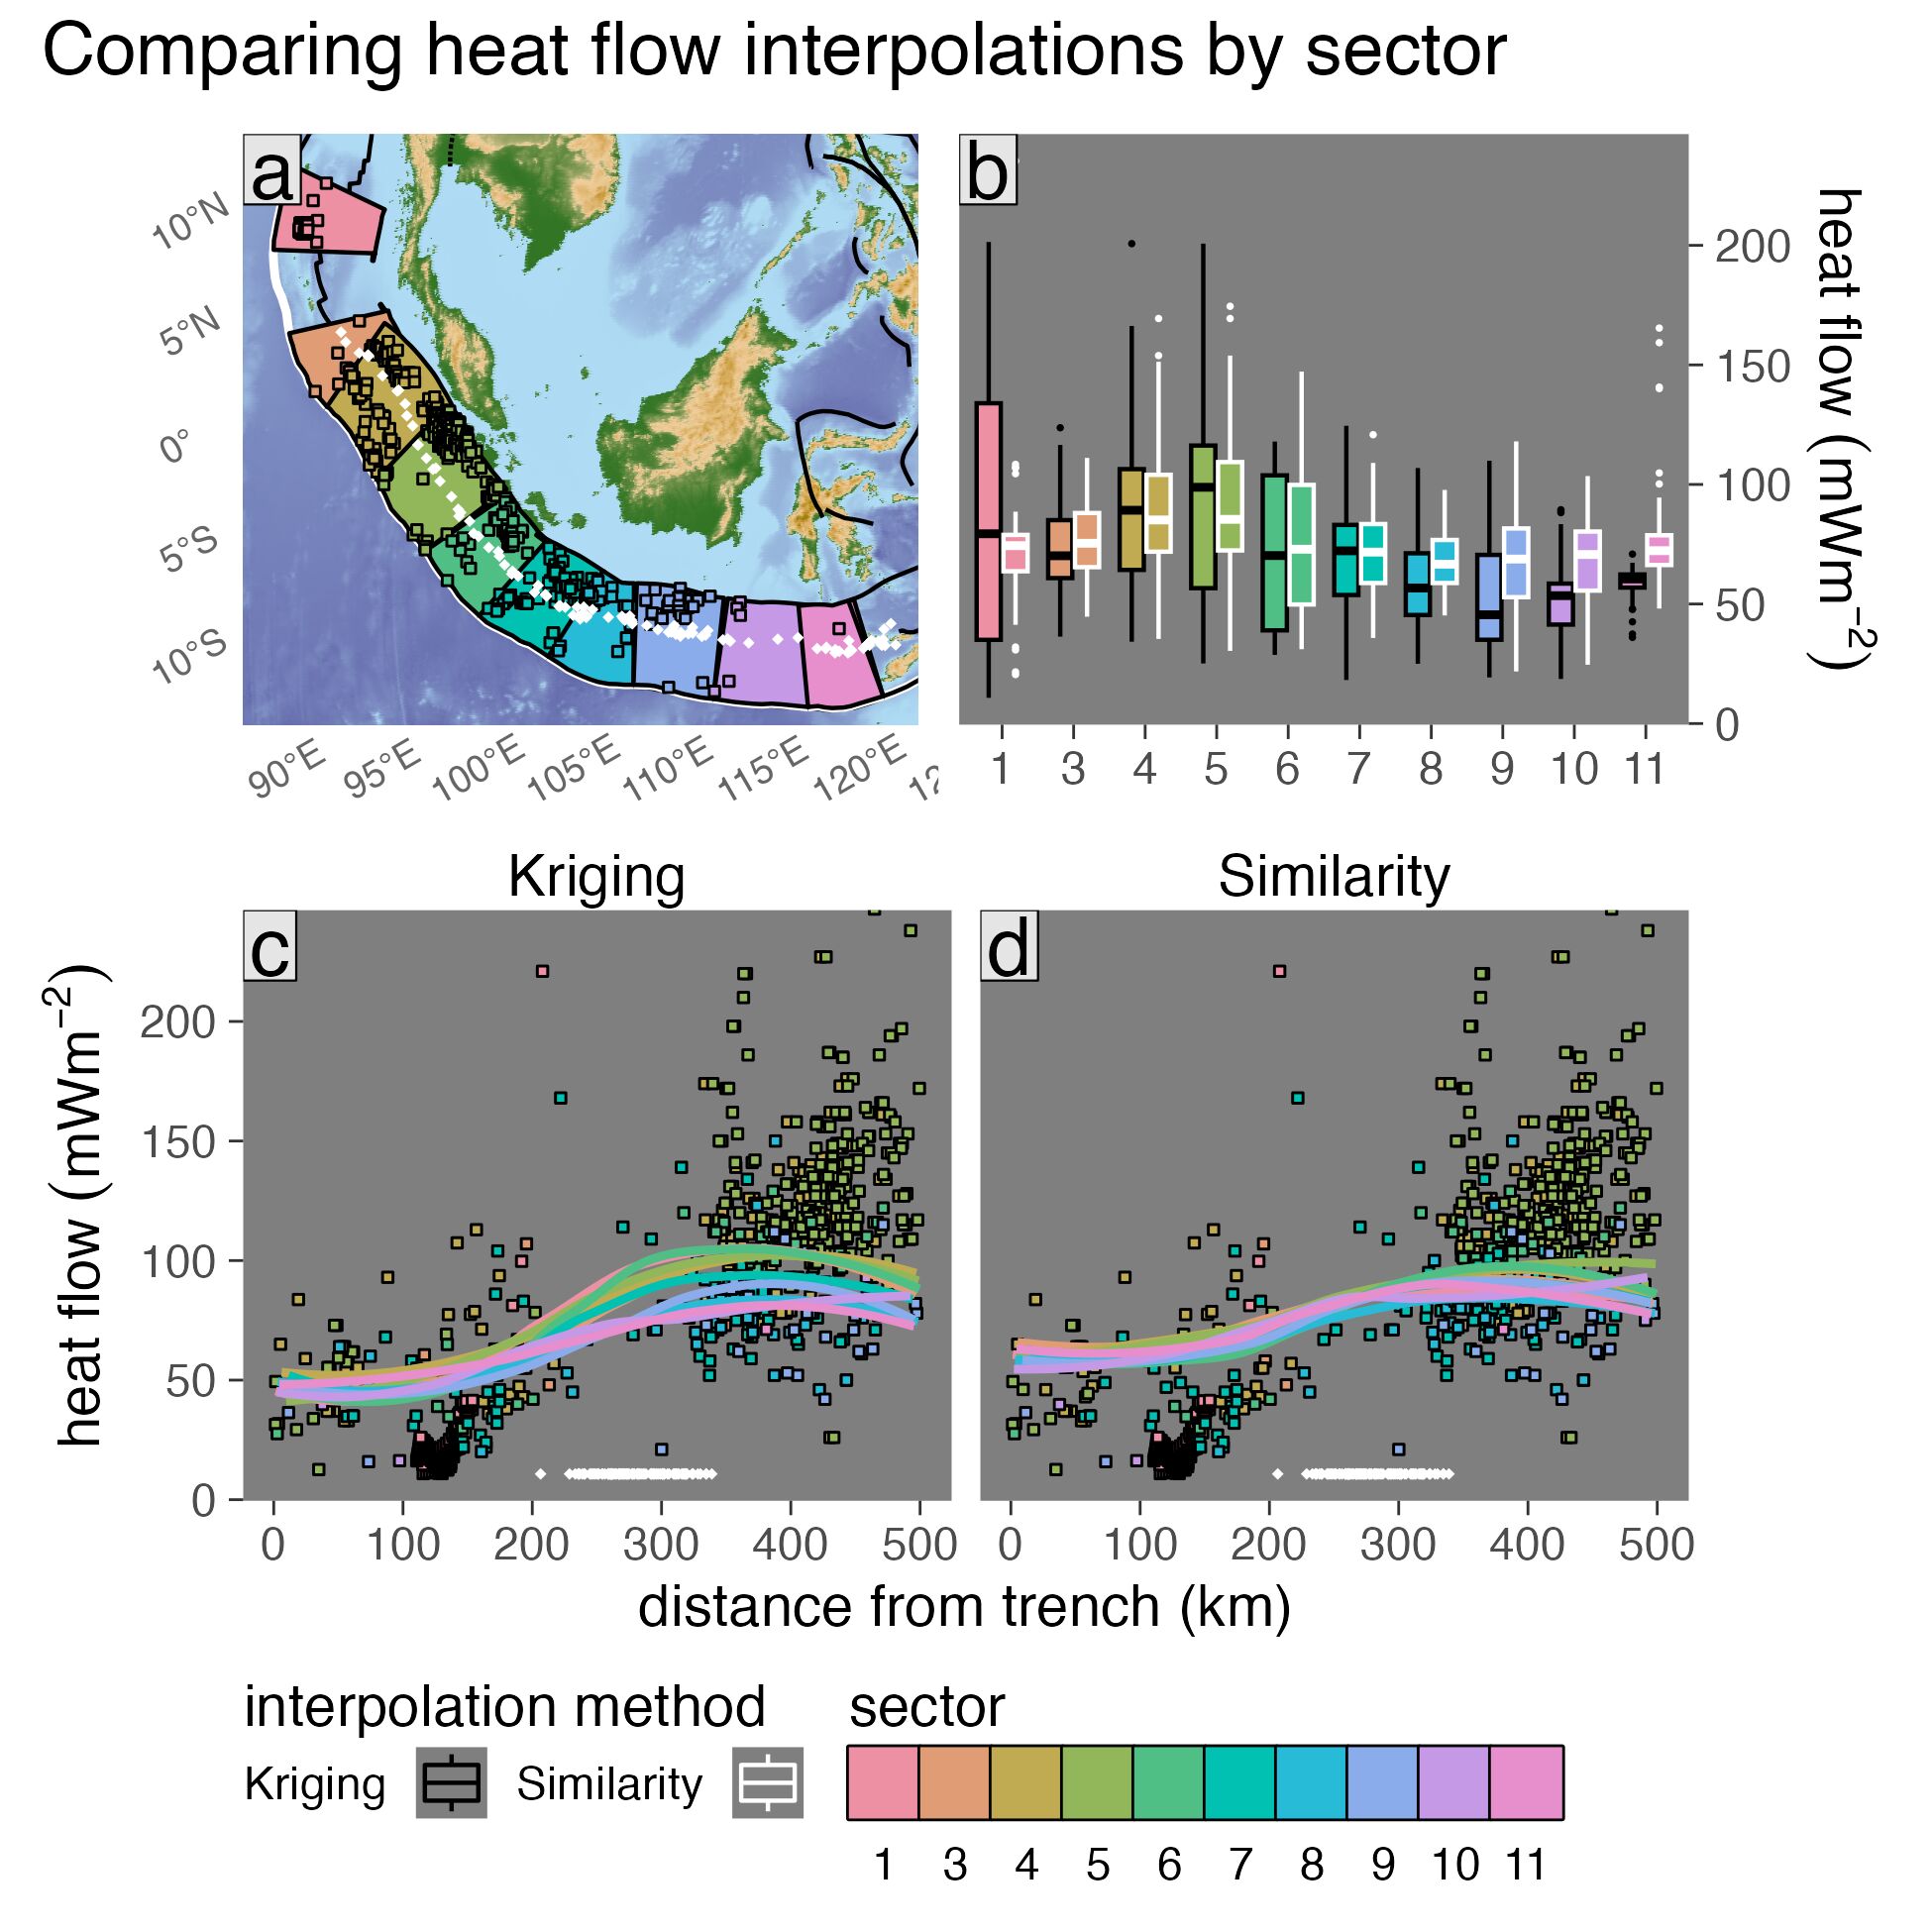 Surface heat flow profiles for Sumatra Banda Sea upper-plate sectors. (a) Similarity and Kriging predictions across sectors are moderately distinguishable with mostly overlapping IQRs, except for sectors 1, 10, & 11 (boxes). (b) Profiles are computed by finding orthogonal distances between the segment boundary (trench; bold black line) and 870 surface heat flow predictions within ten 500 km-wide sectors (colored polygons). Profiles (colored curves with 95% confidence intervals) of (c) Kriging predictions show greater overall spread than (d) Similarity profiles (e.g. \(\geq\) 200 km from the trench), implying nonuniform upper-plate surface heat flow across the segment. Colored squares are ThermoGlobe data from Lucazeau (2019). Segment boundary and volcanoes (gold diamonds) defined by Syracuse & Abers (2006). Plate boundaries (bold black lines) defined by Lawver et al. (2018). Profile curves in (c) are LOESS regressions through three-point running averages (small colored data points).